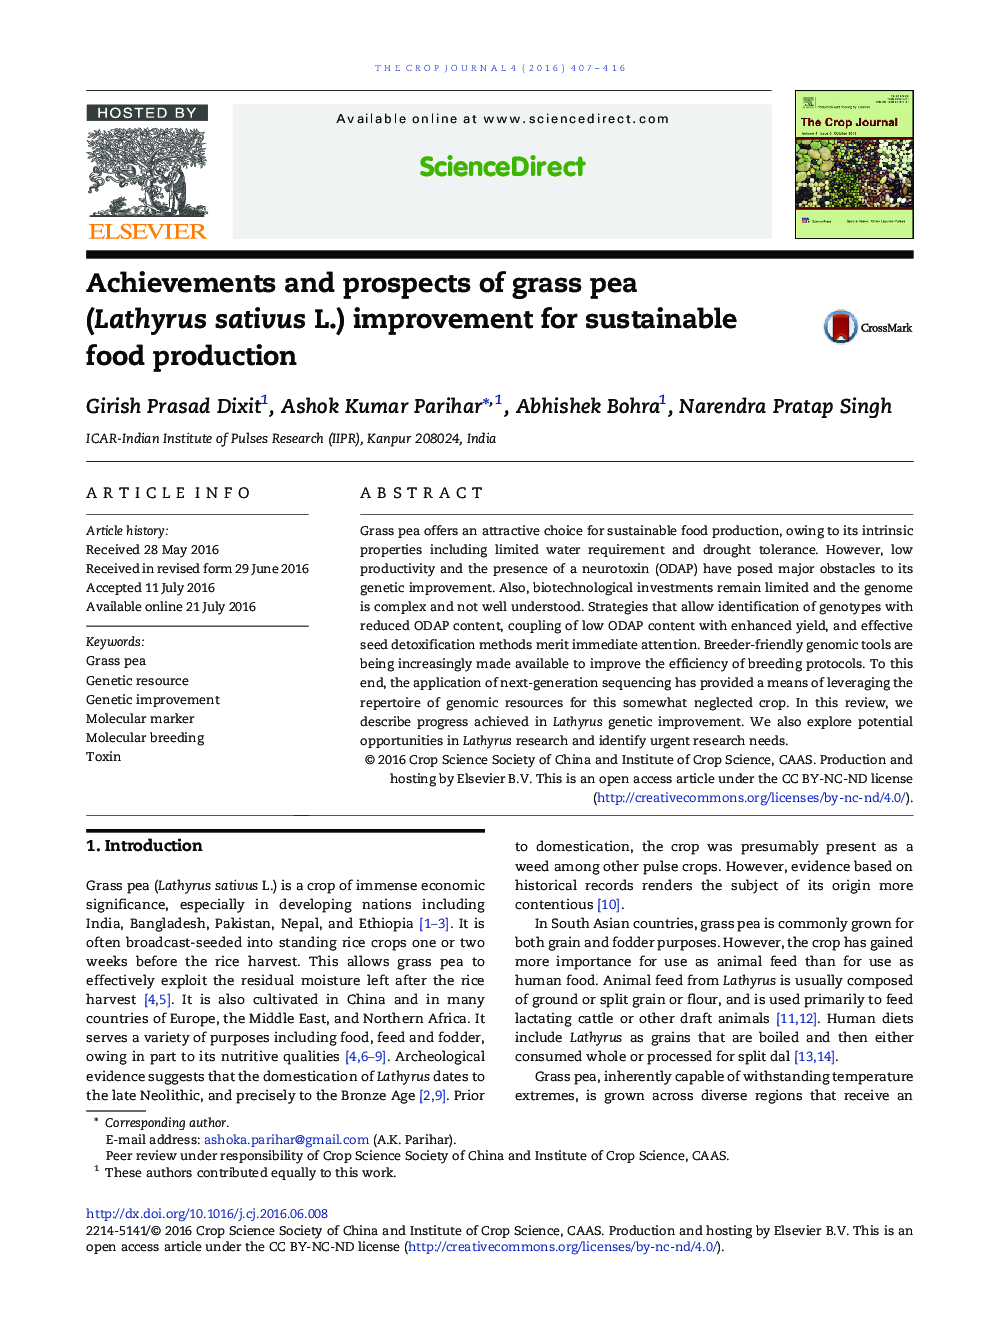 Achievements and prospects of grass pea (Lathyrus sativus L.) improvement for sustainable food production